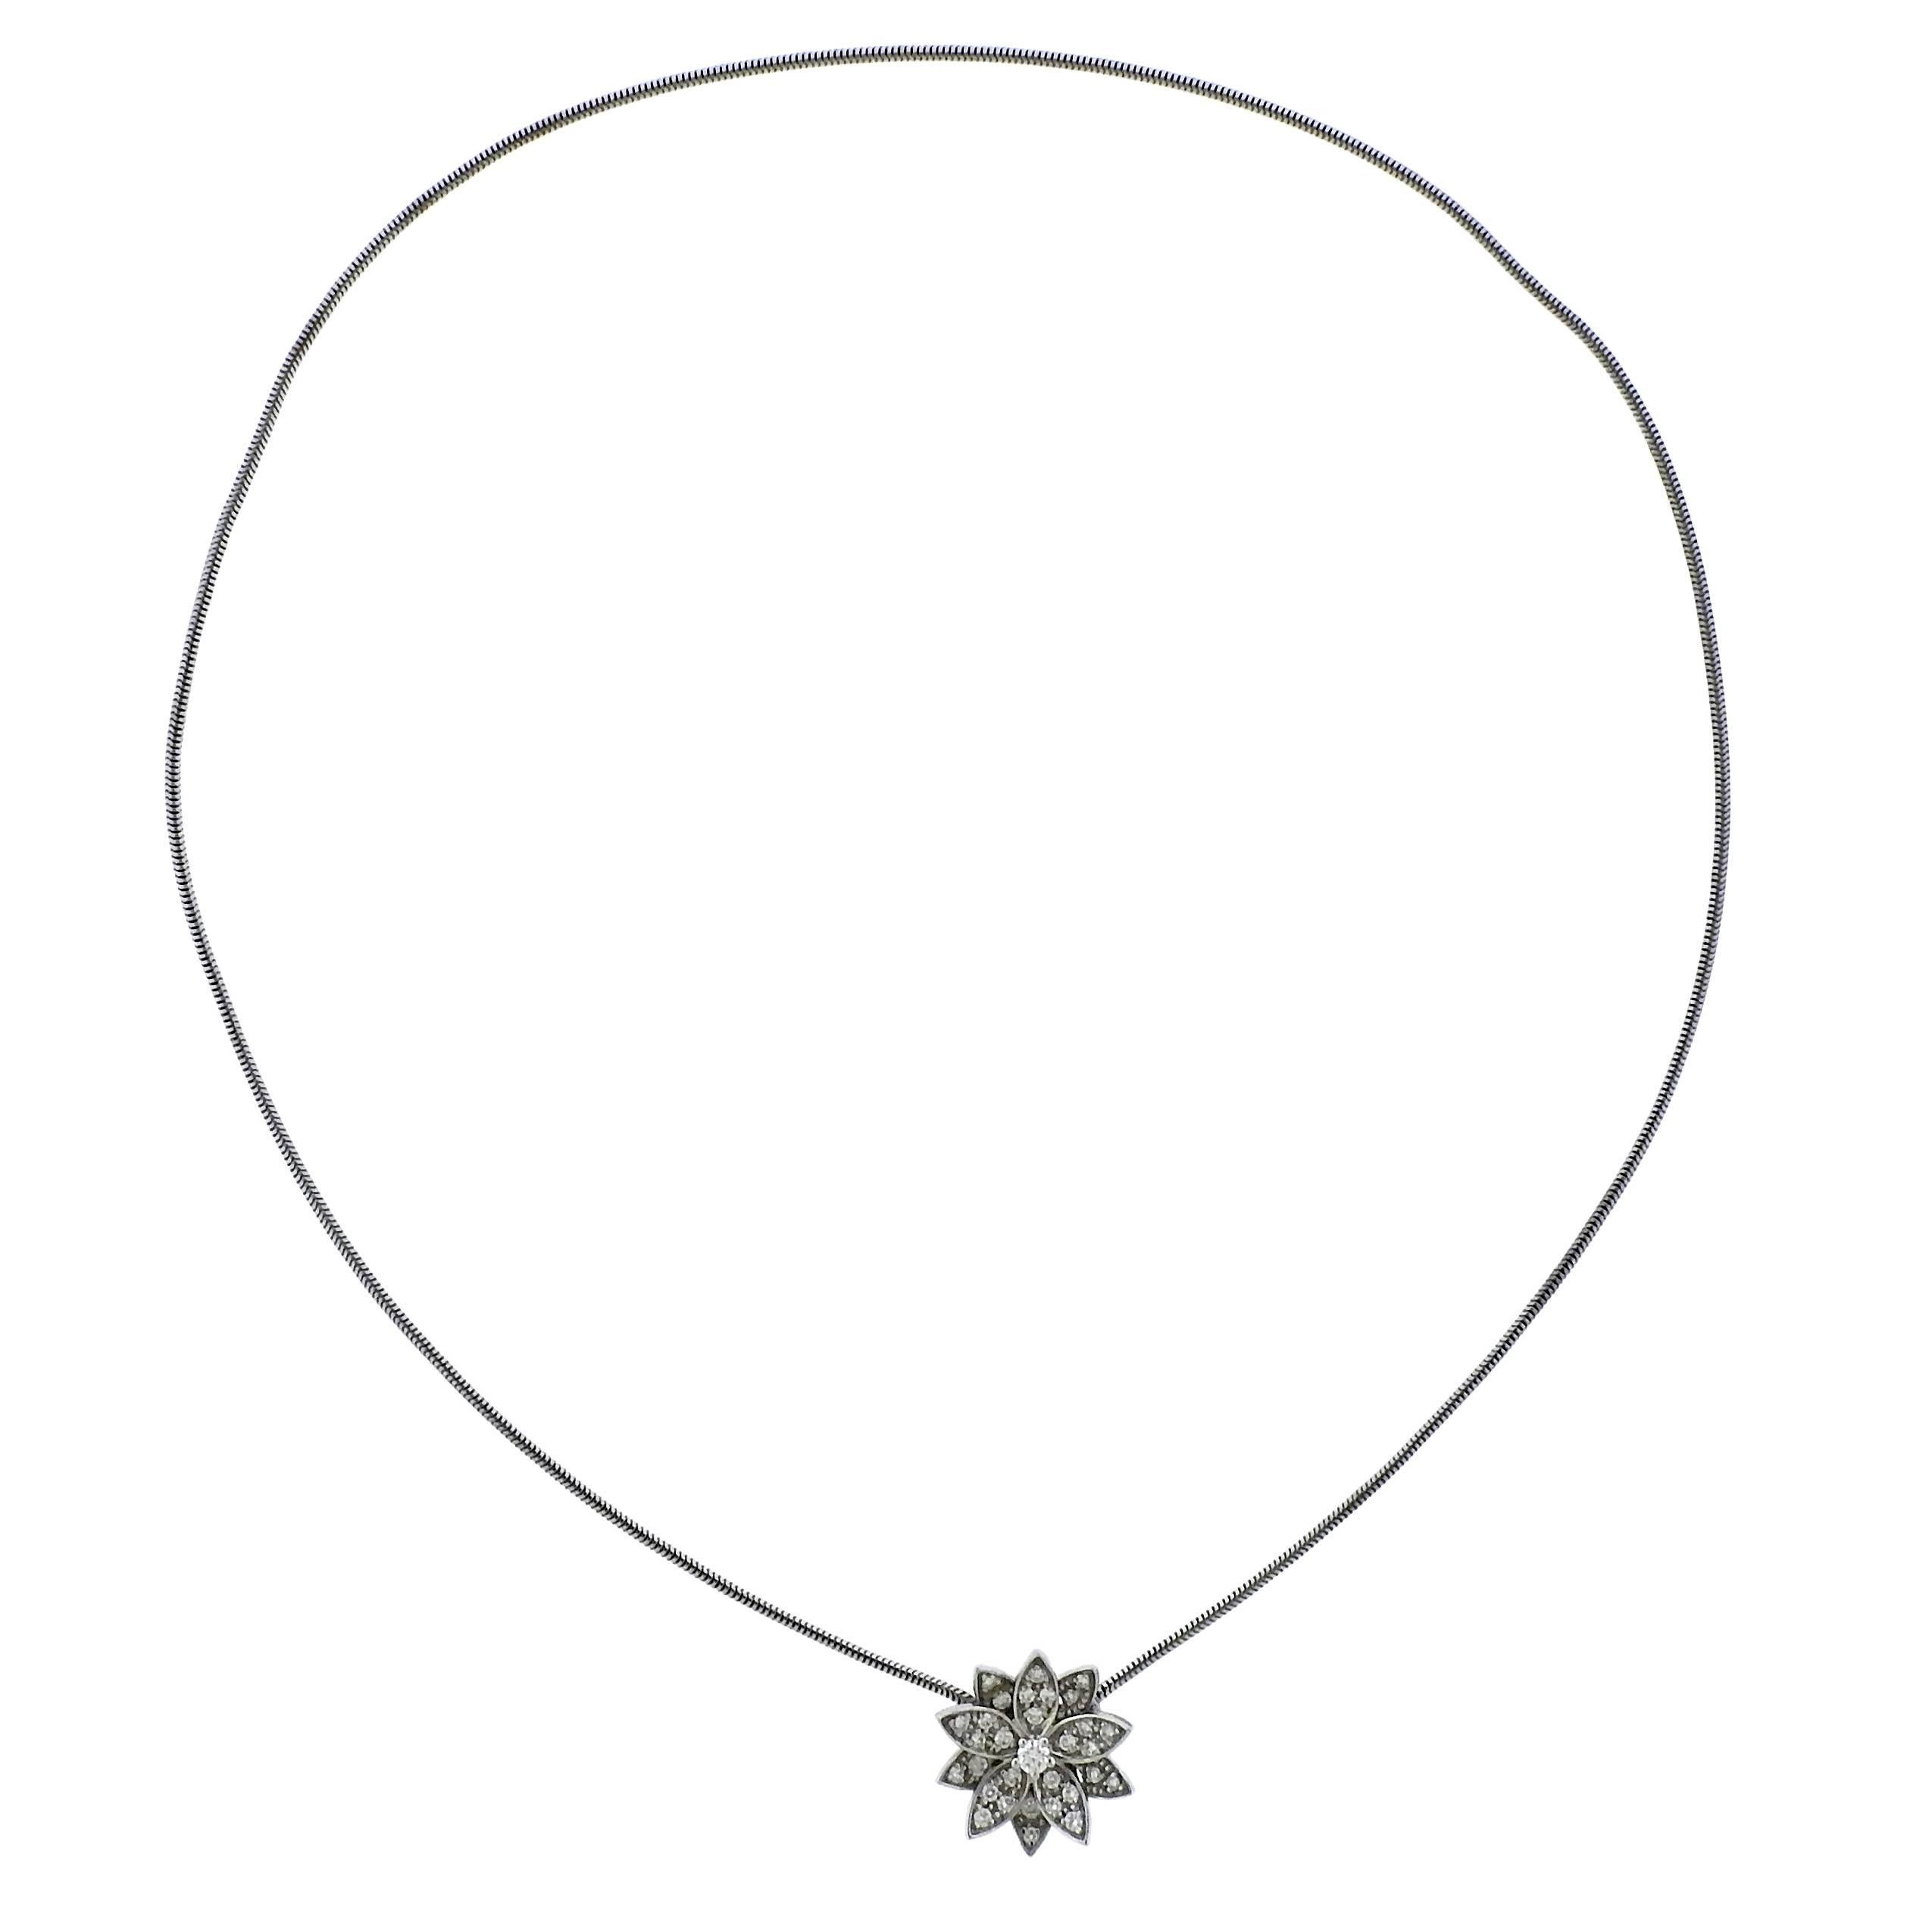 18k white gold Lotus pendant necklace, crafted by Van Cleef & Arpels, decorate with approx. 0.46ctw ni FG/VVS diamonds. Retail $10300., comes with pouch.  Necklace is 15 3/4